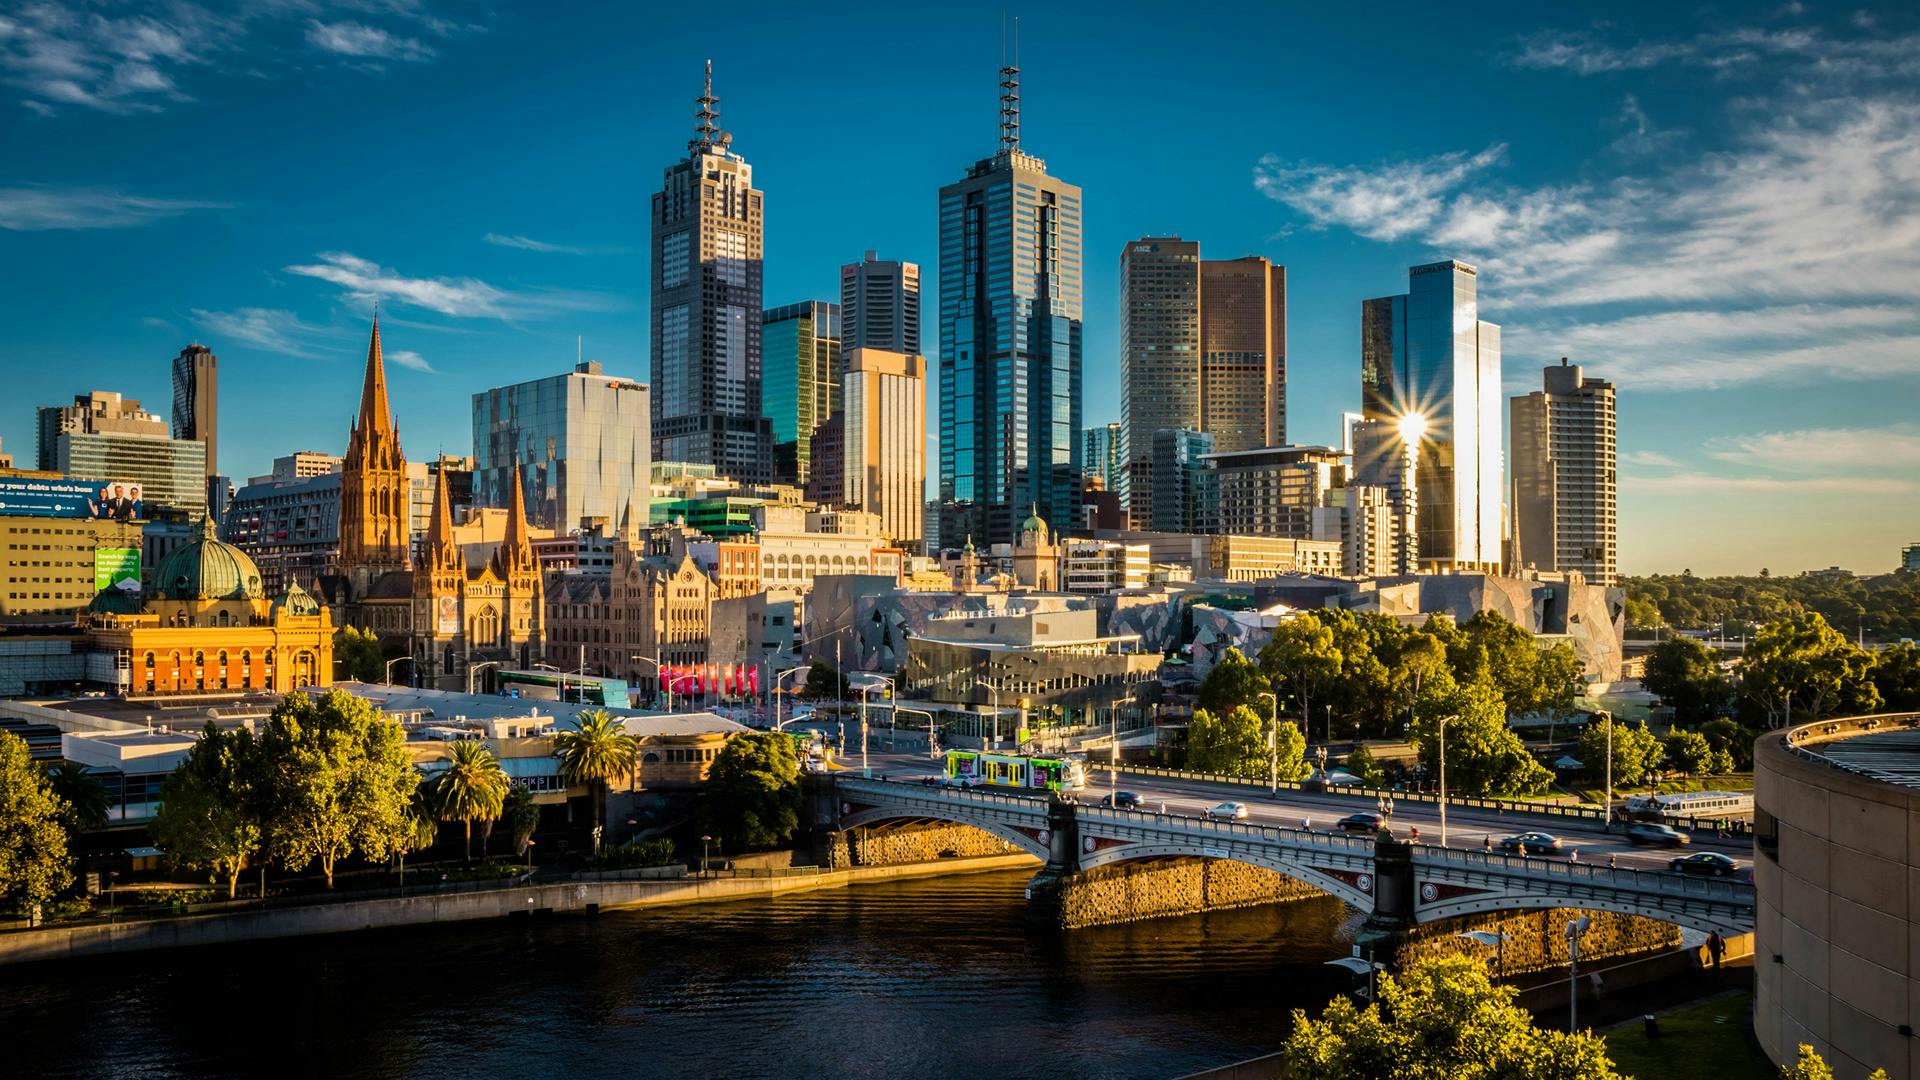 The City of Melbourne